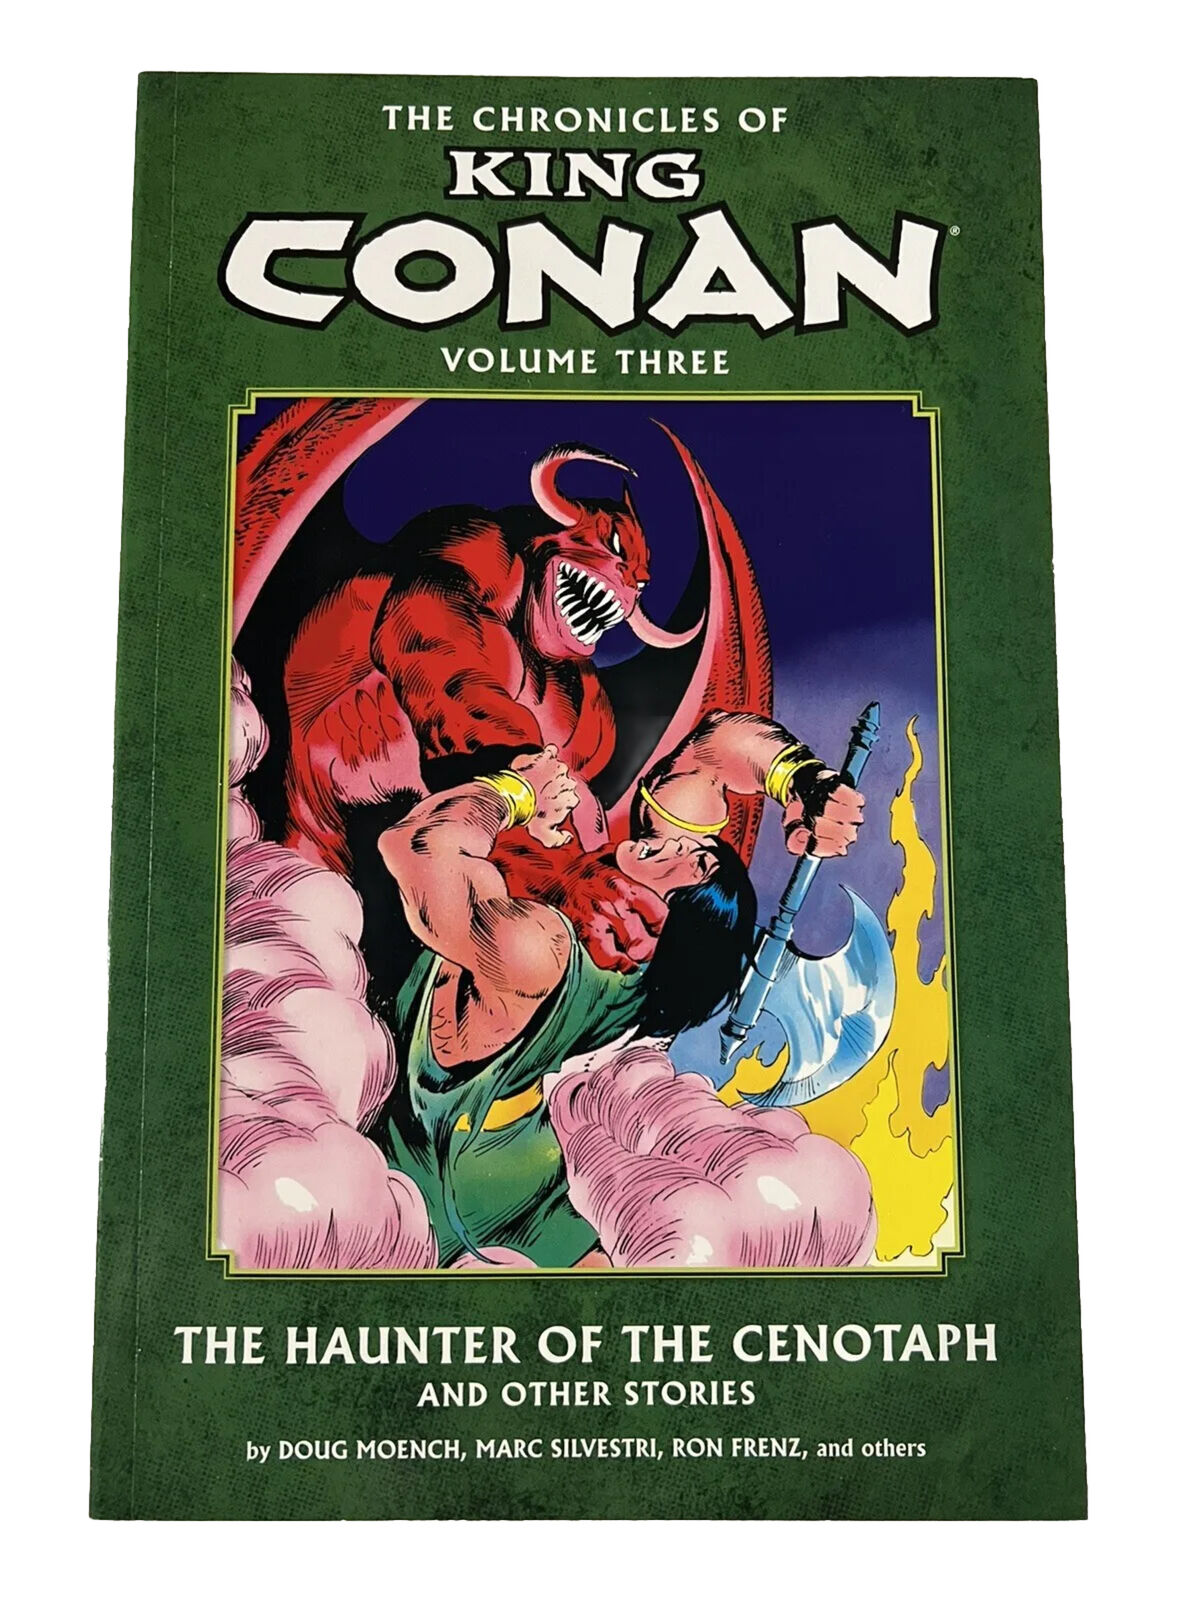 The Chronicles of King Conan Vol 3 Haunter of the Cenotaph Tpb Graphic Novel